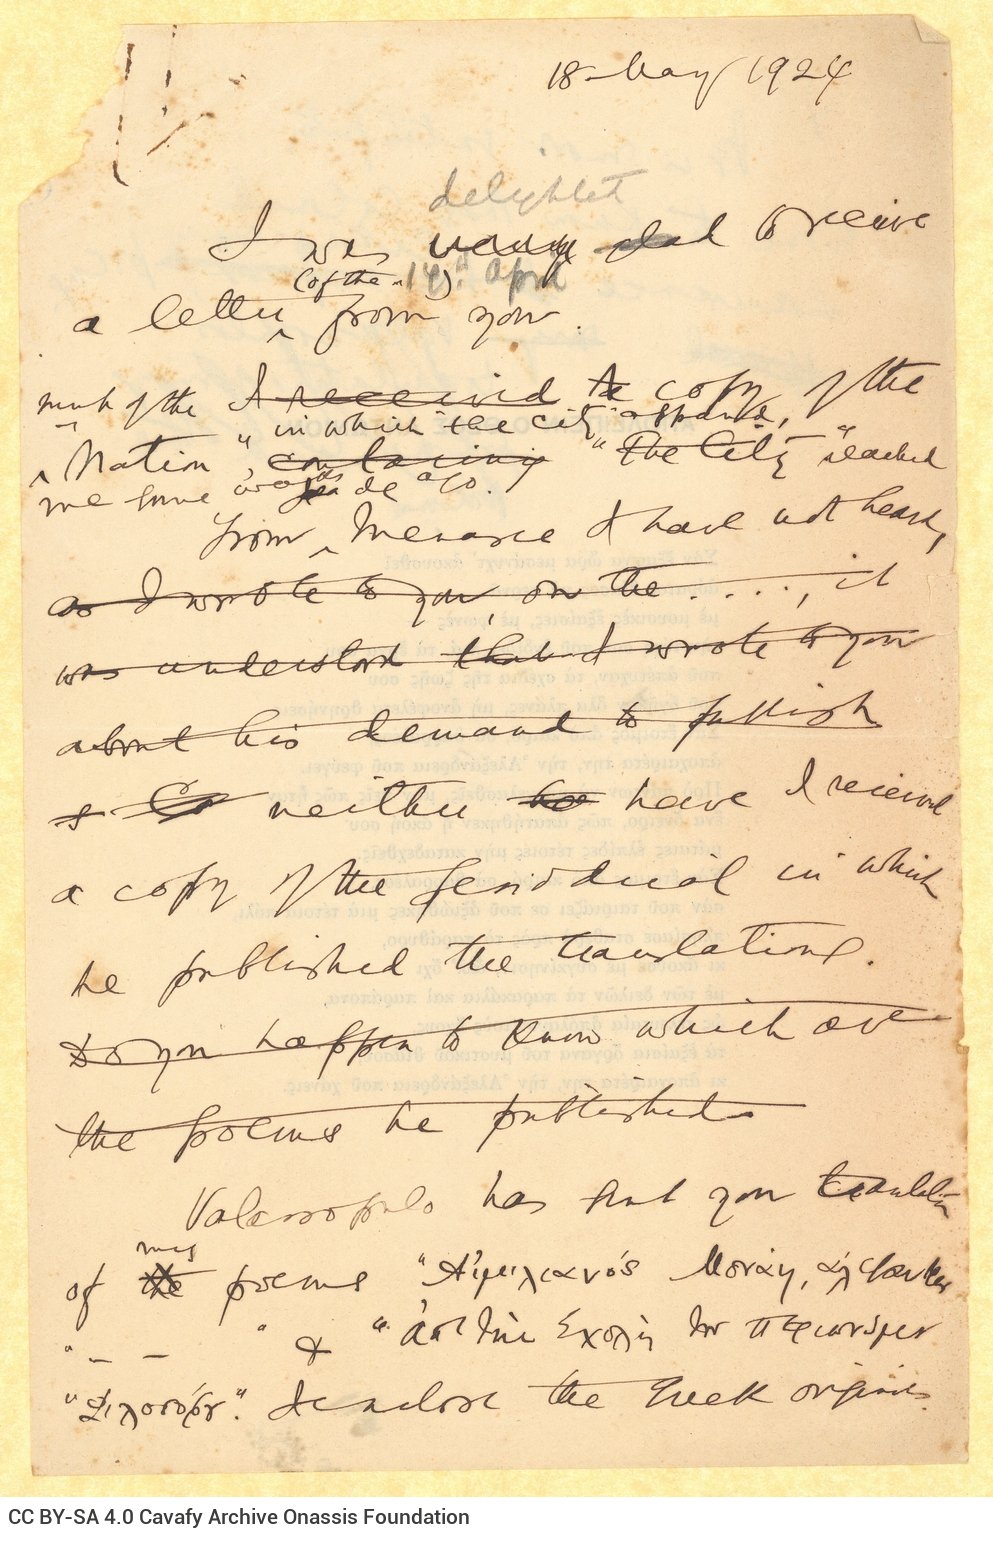 Handwritten draft letter by Cavafy to E. M. Forster, written on both sides of an undated broadsheet containing the poem "The 